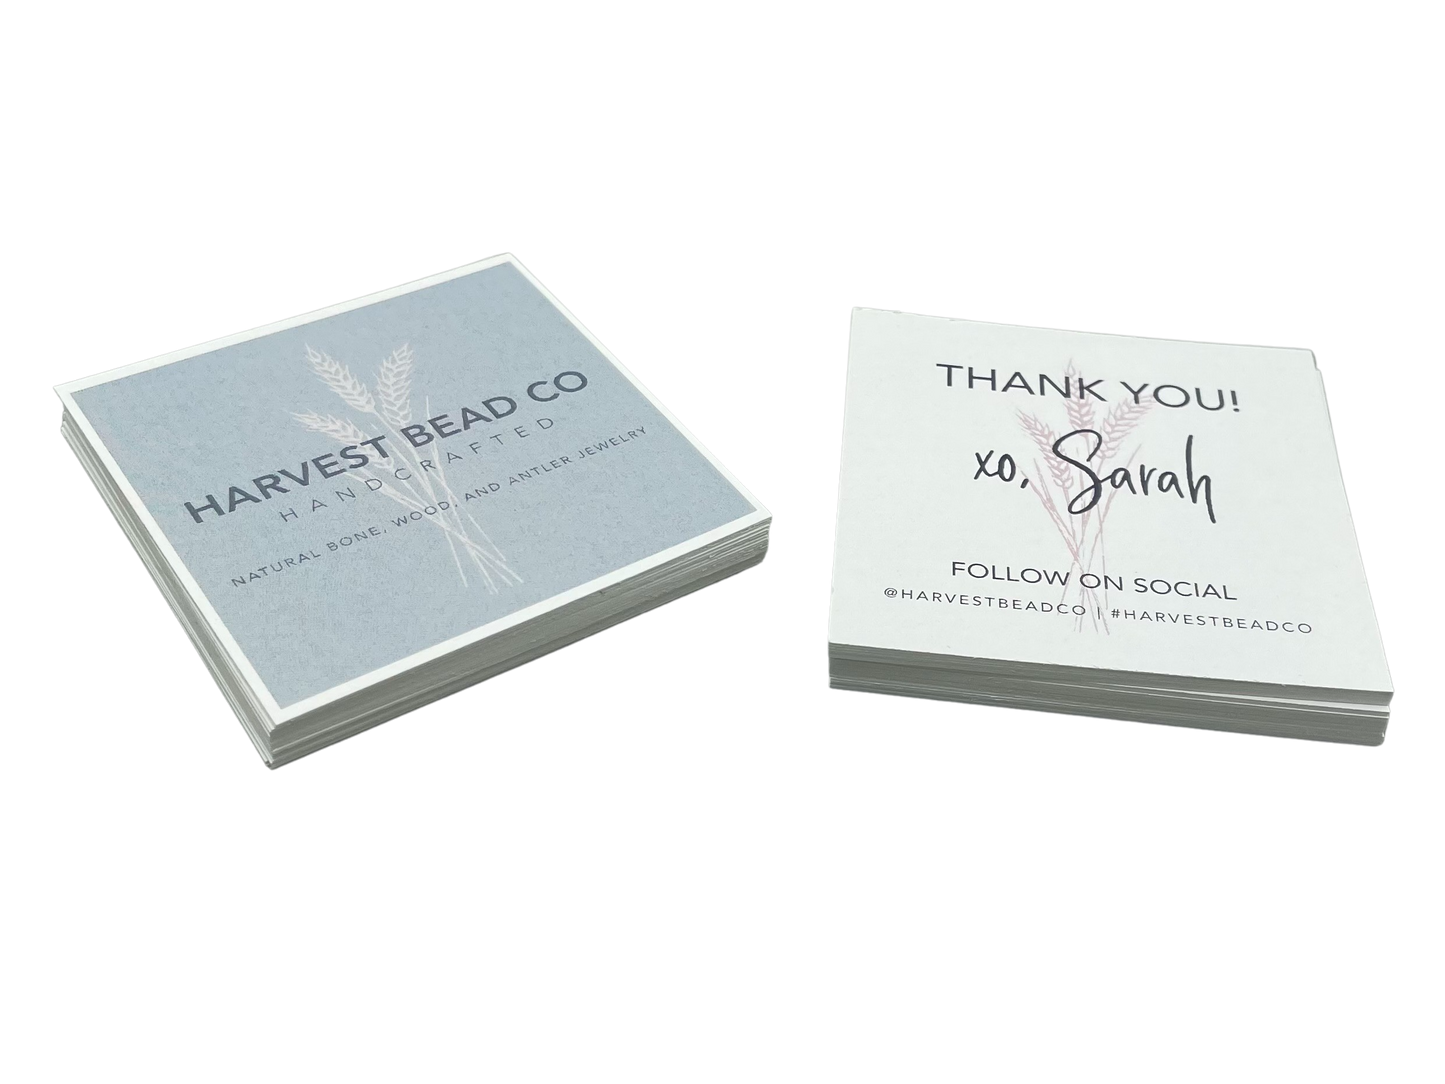 square 18pt soft touch business cards